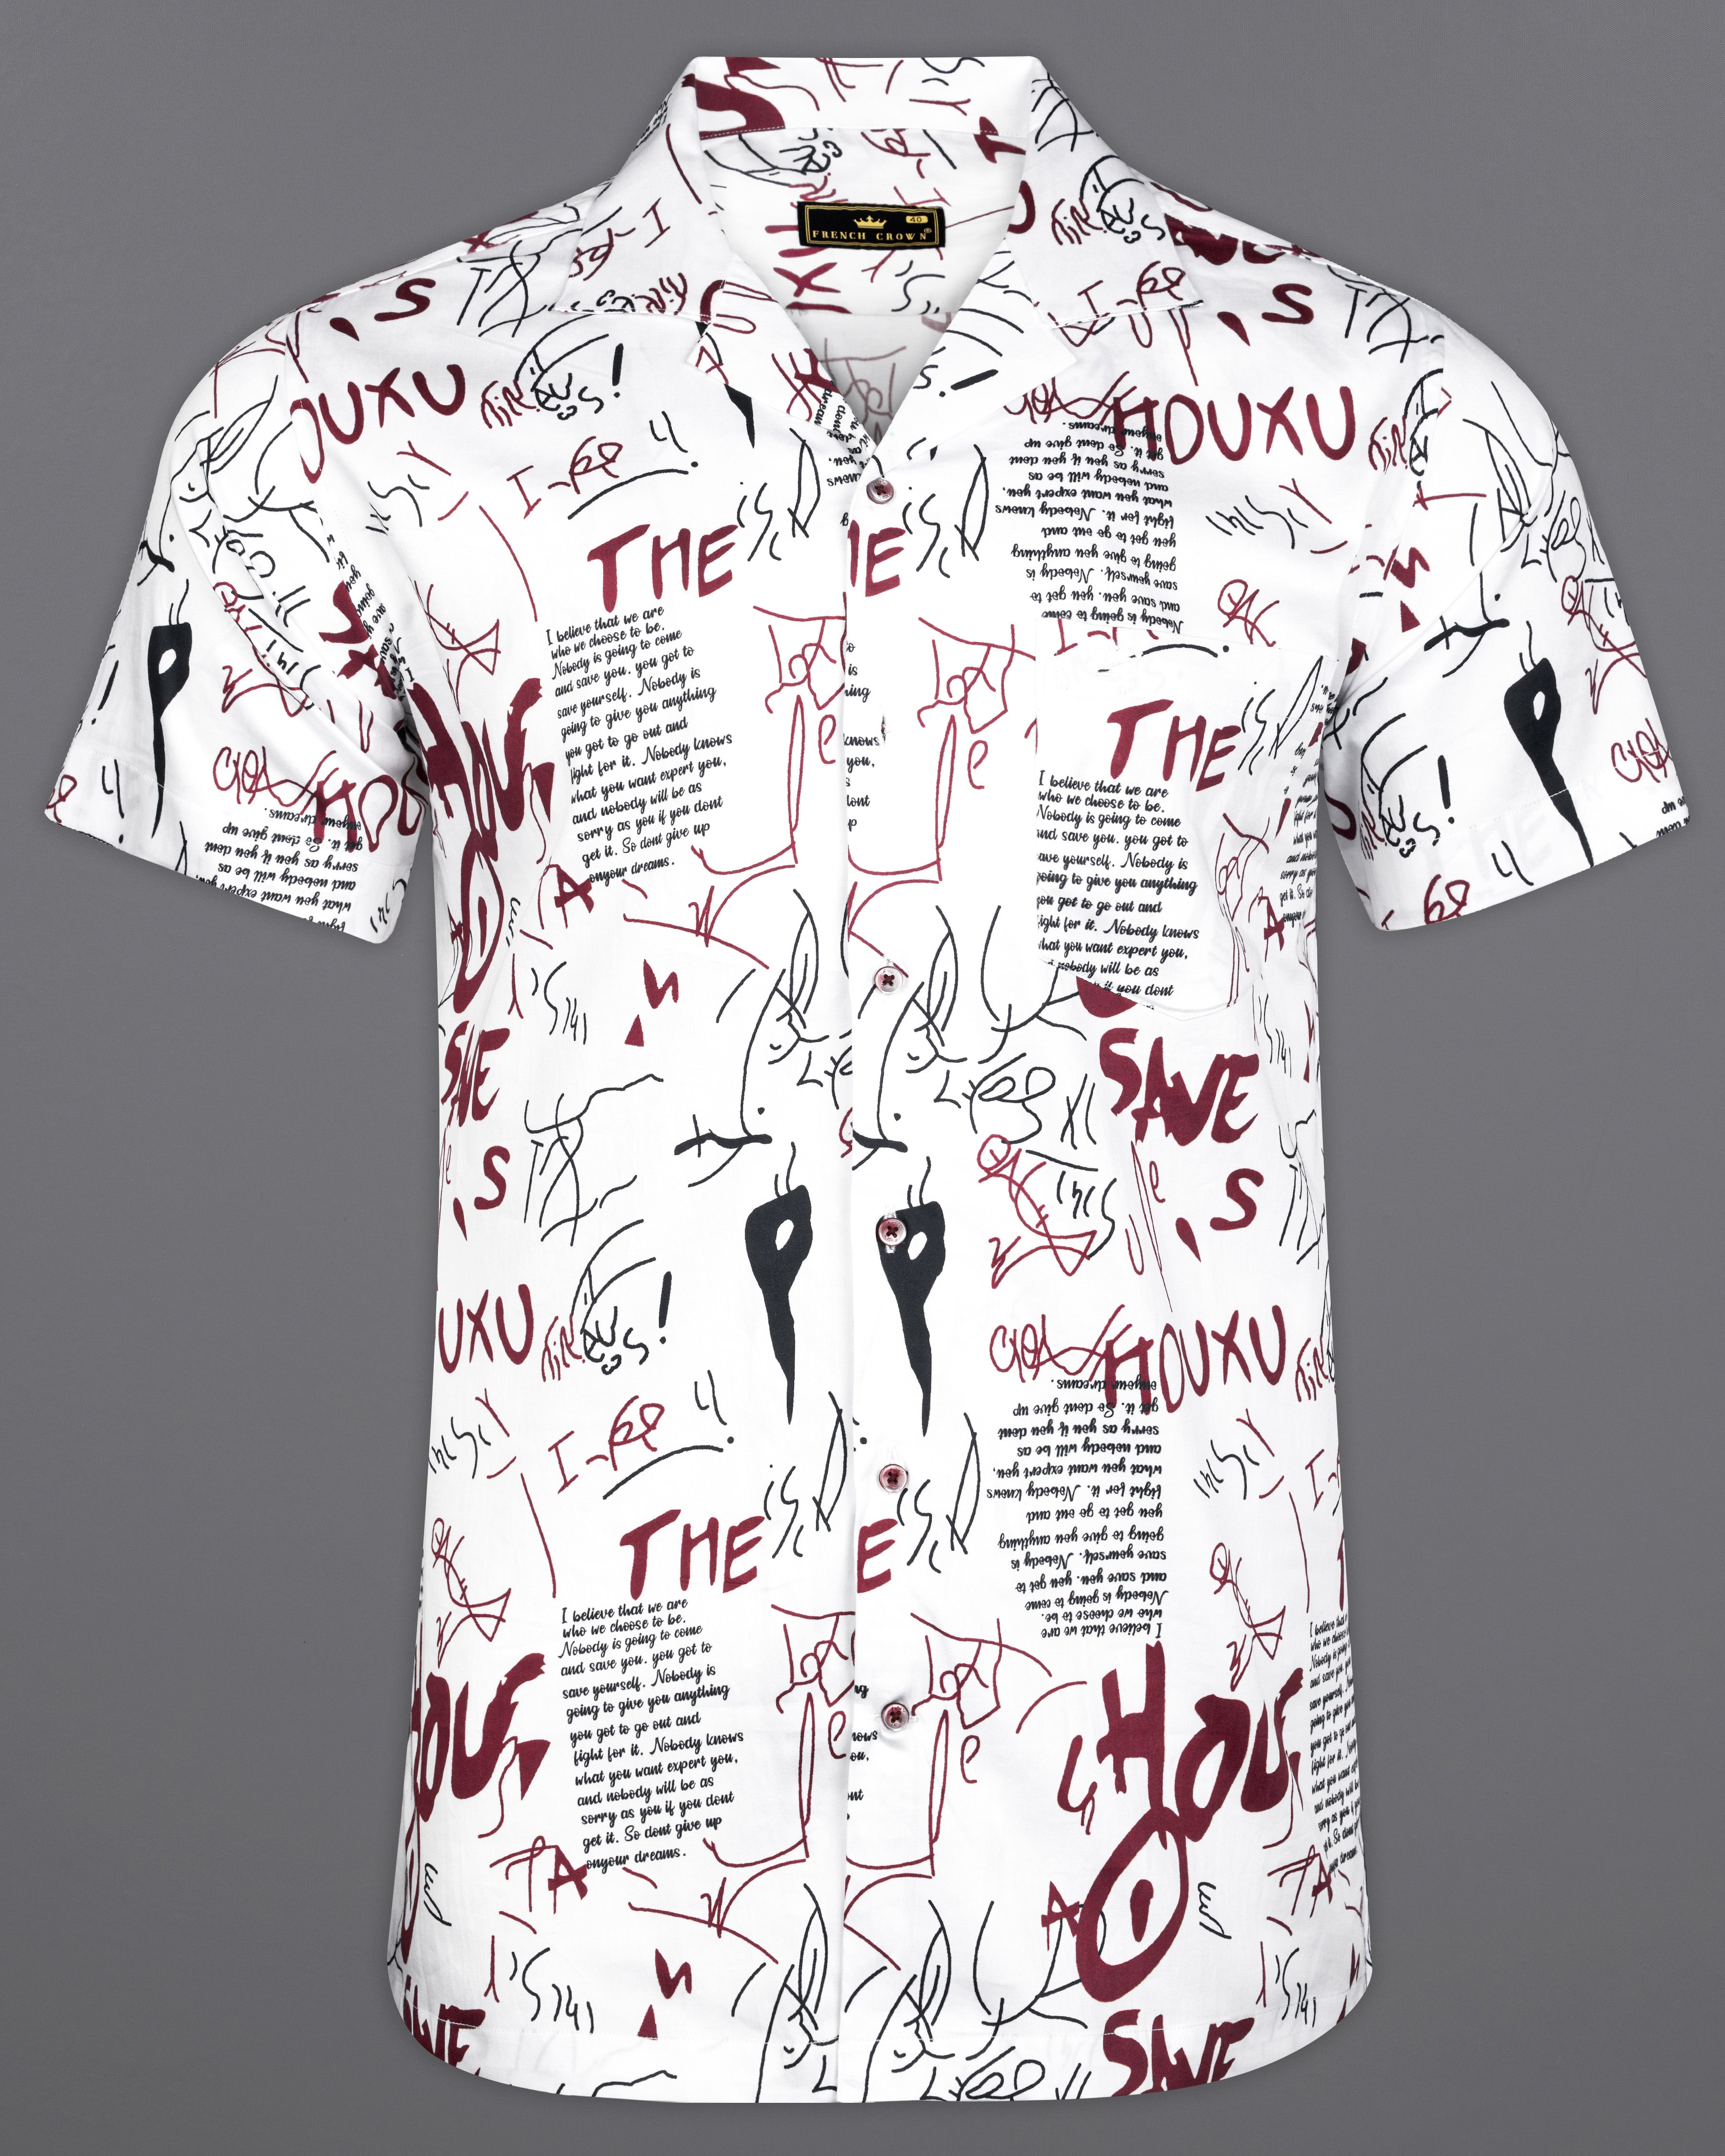 Bright White with Wine Doodle Printed Super Soft Shirt 9956-CC-SS-MN-38, 9956-CC-SS-MN-39, 9956-CC-SS-MN-40, 9956-CC-SS-MN-42, 9956-CC-SS-MN-44, 9956-CC-SS-MN-46, 9956-CC-SS-MN-48, 9956-CC-SS-MN-50, 9956-CC-SS-MN-52